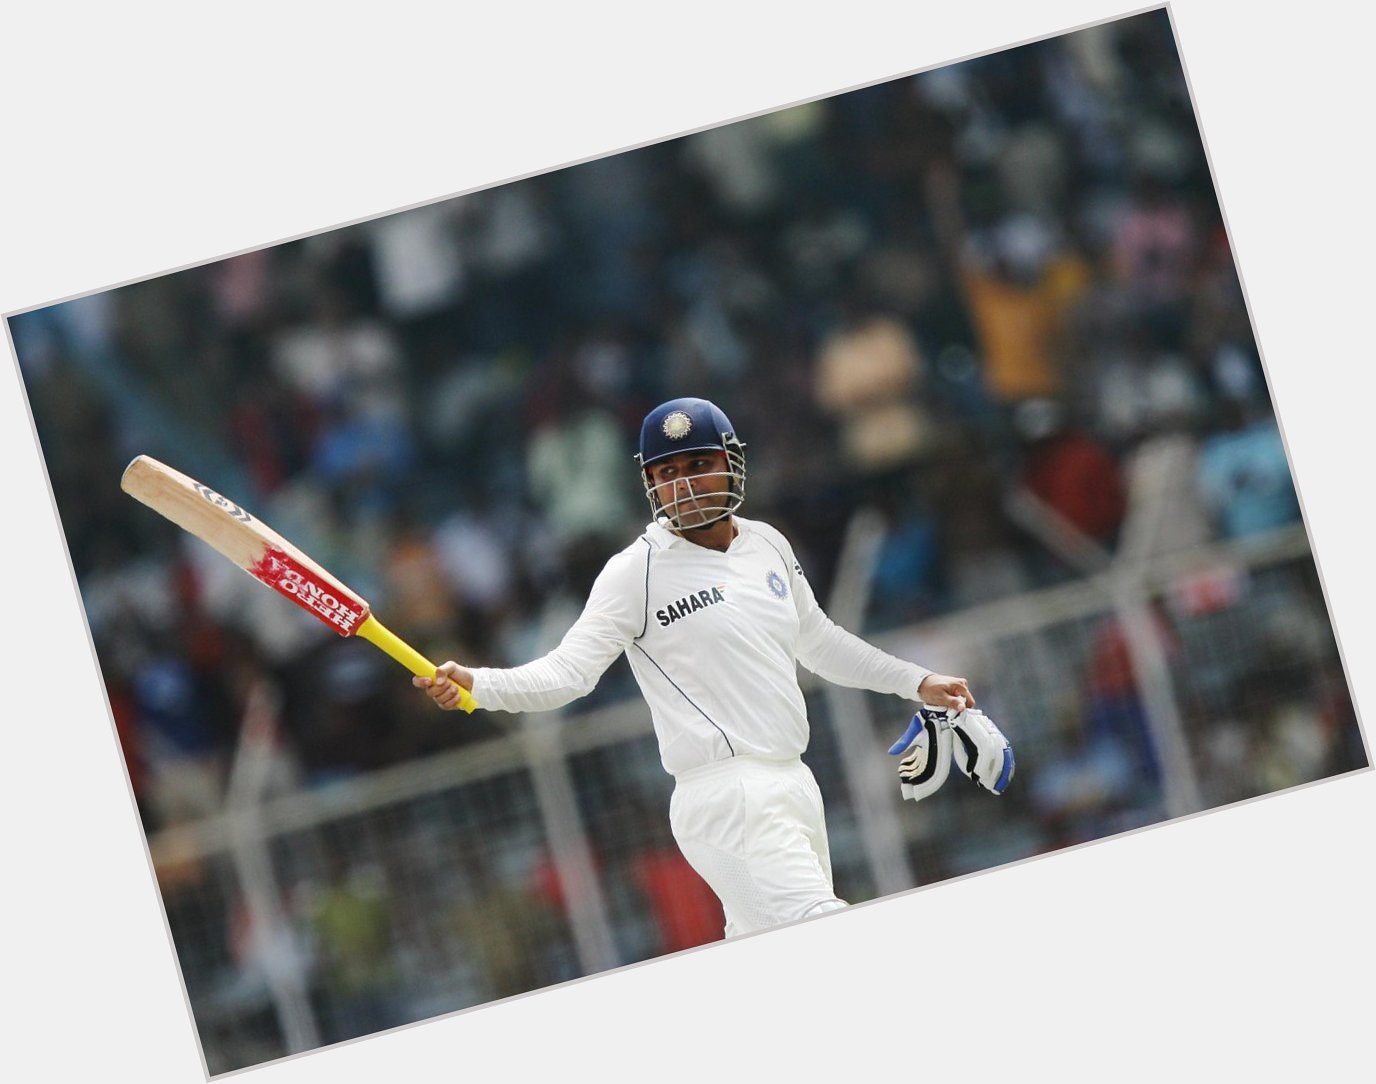 Virender Sehwag - your presence on the international arena will be missed! 

A very Happy Birthday to you! 